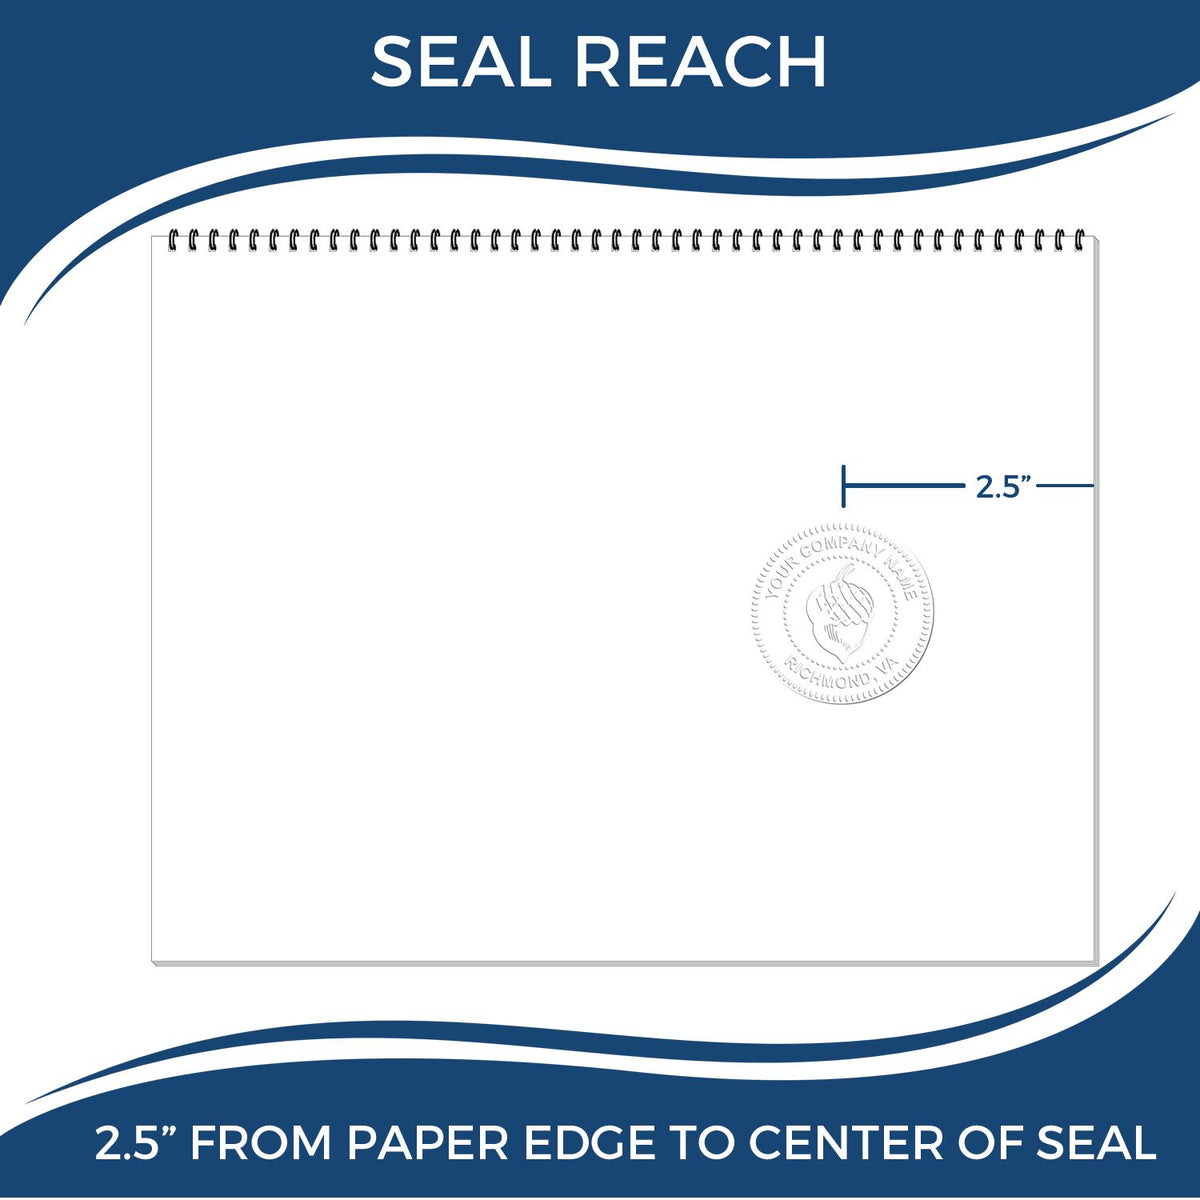 An infographic showing the seal reach which is represented by a ruler and a miniature seal image of the Long Reach Kansas Geology Seal